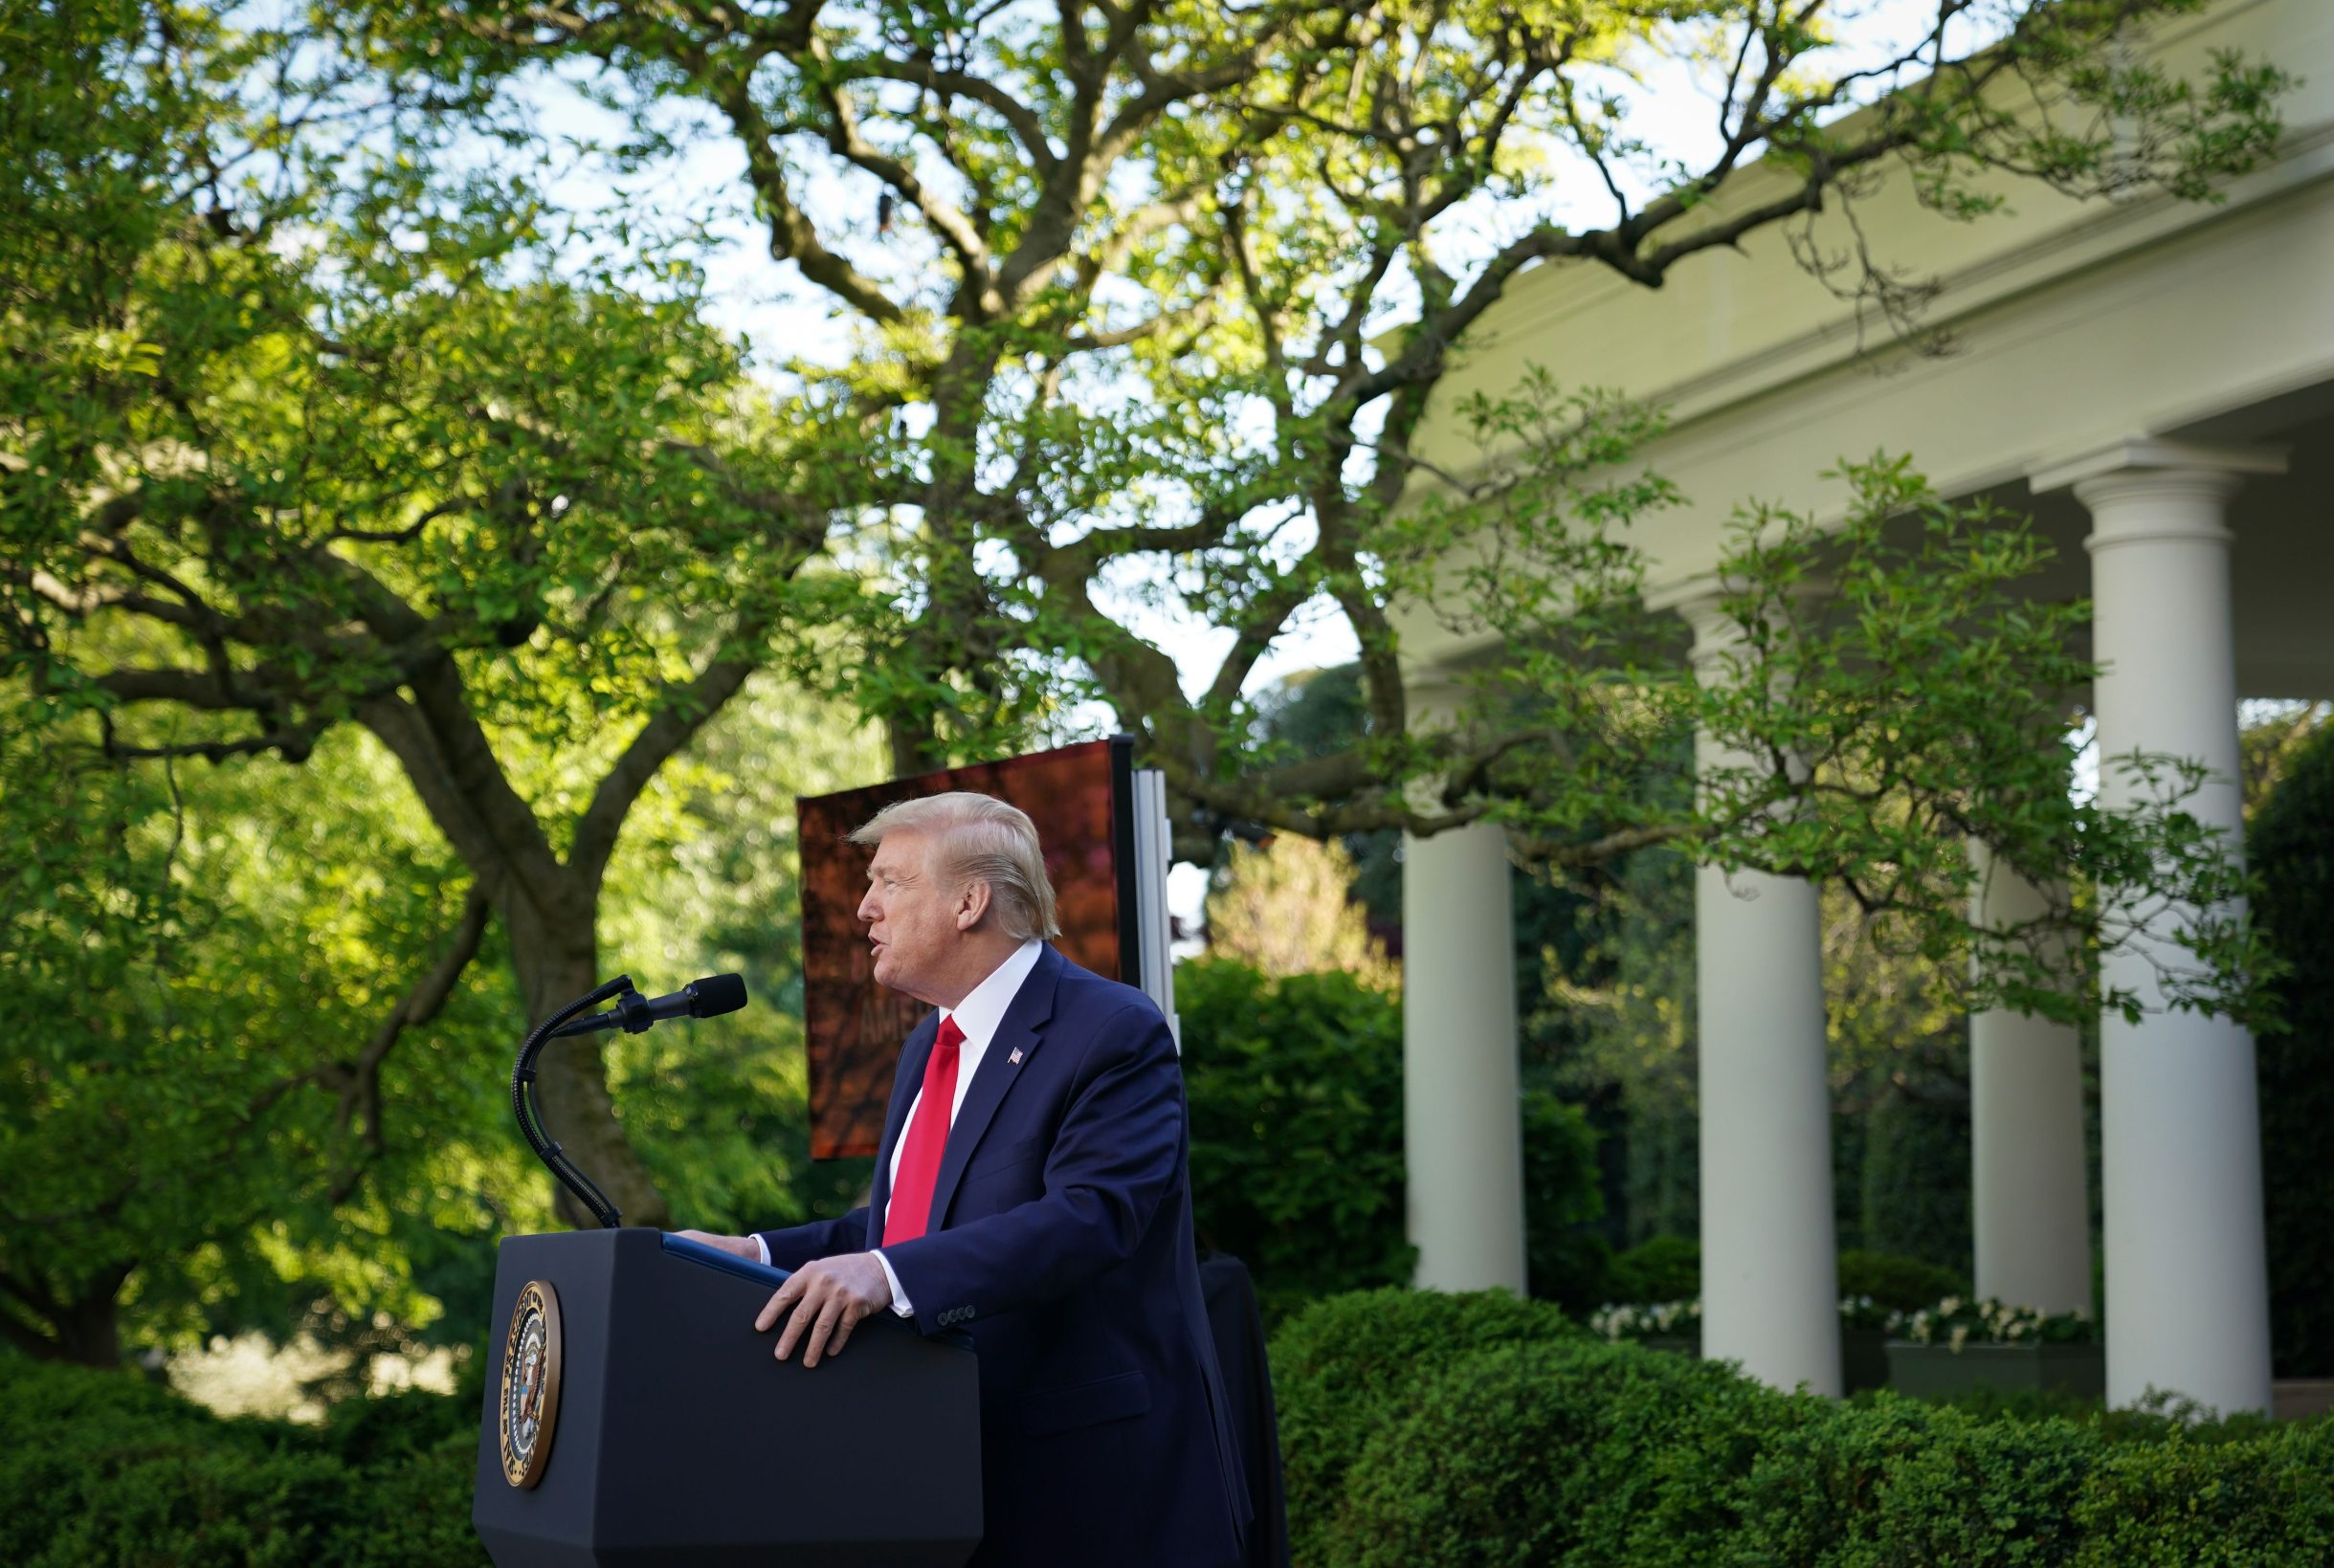 US President Donald Trump speaks during a news conference on the novel coronavirus, COVID-19, in the Rose Garden of the White House in Washington, DC on April 27, 2020. (Photo by MANDEL NGAN / AFP)